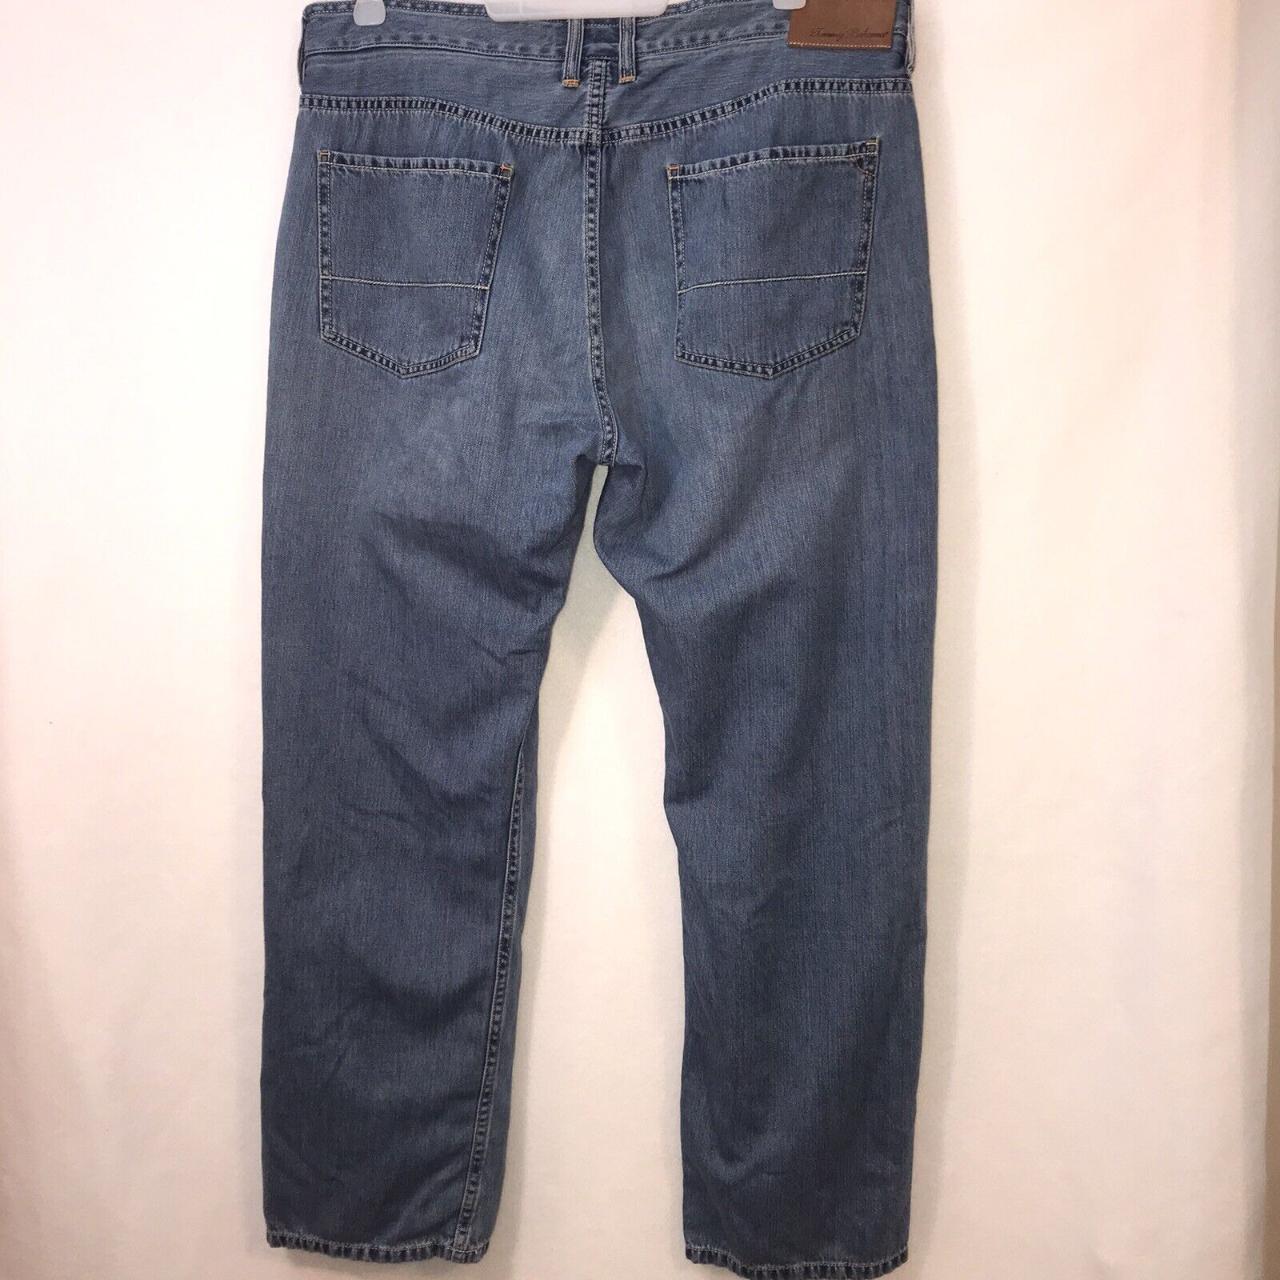 Mens Tommy Bahama Jeans Size 38X30. Condition is... - Depop